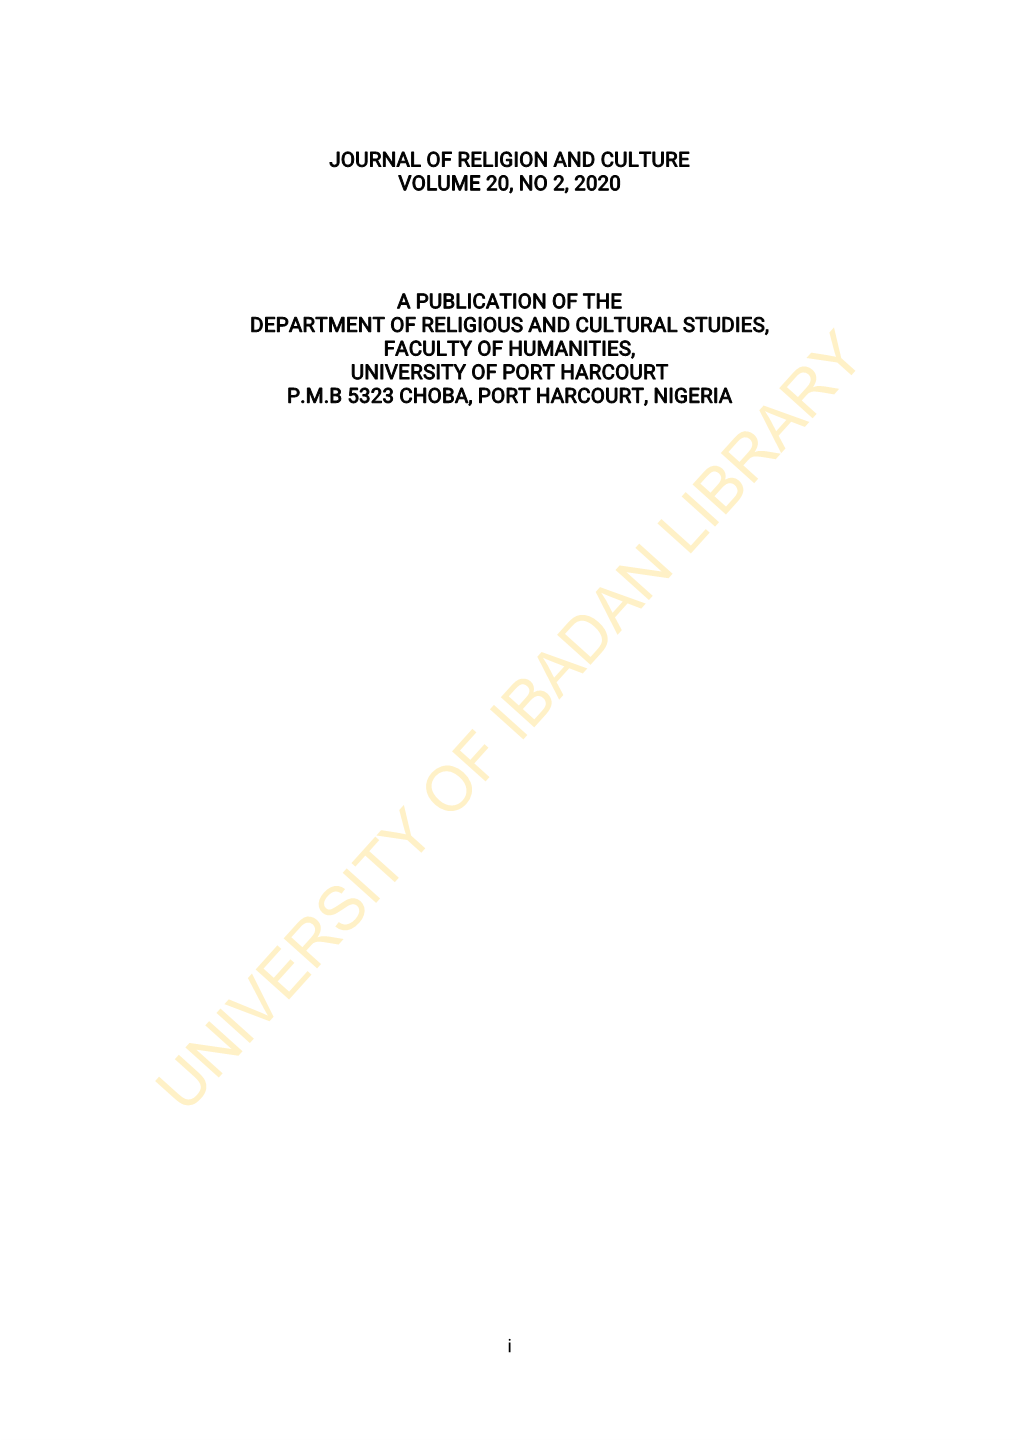 A Publication of the Department of Religious and Cultural Studies, Faculty of Humanities, University of Port Harcourt P.M.B 5323 Choba, Port Harcourt, Nigeria